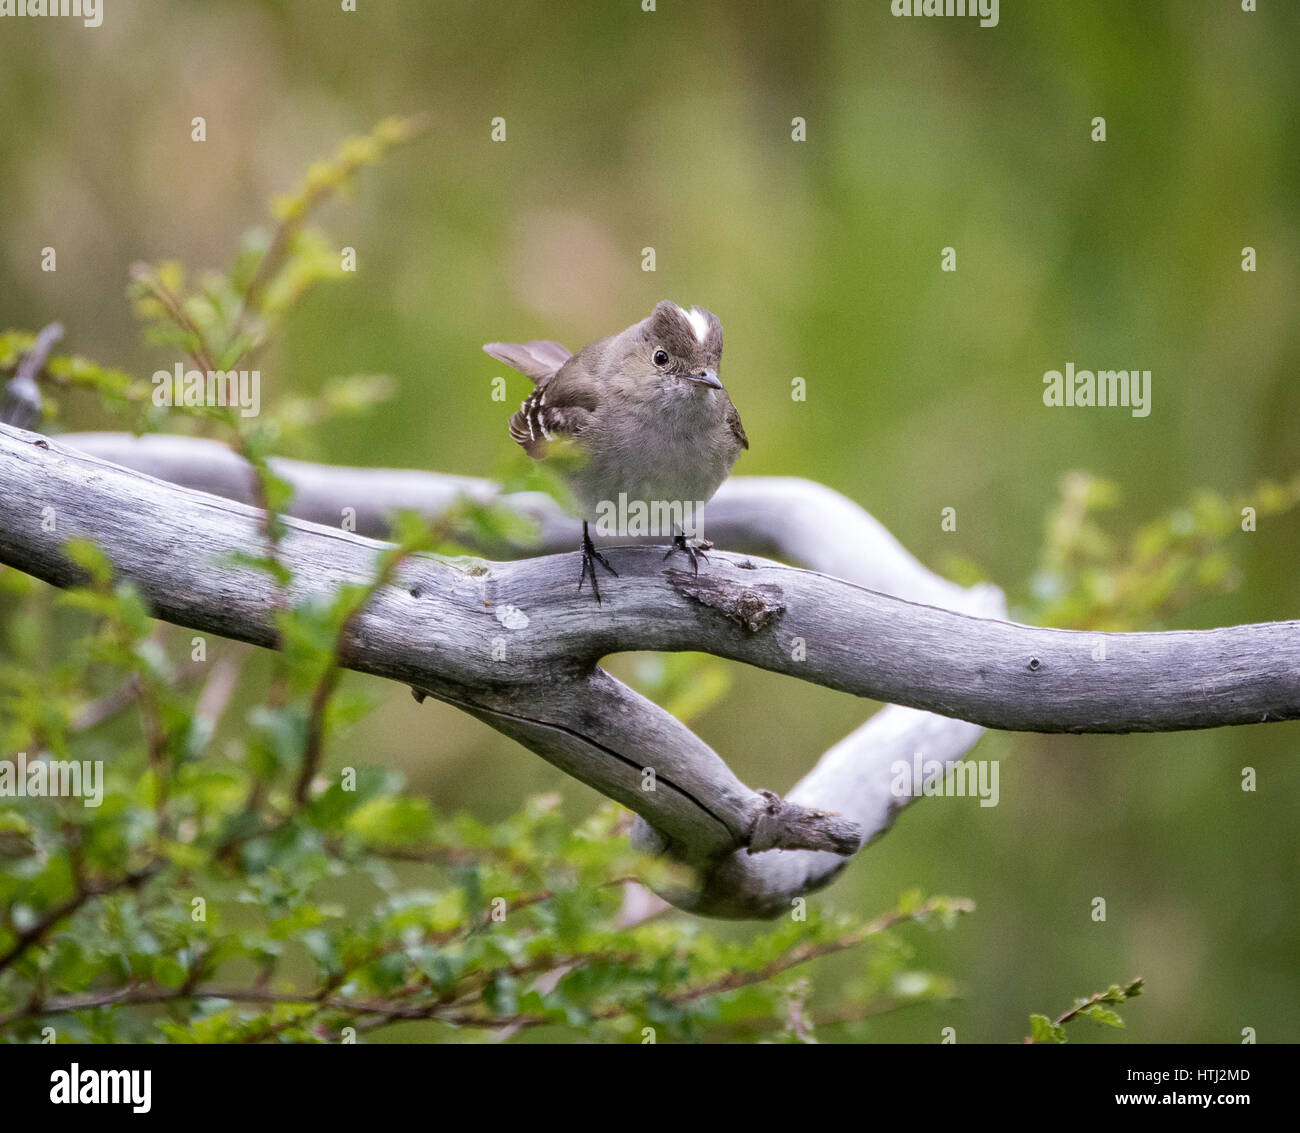 One of the many birds that you will find inTorres del Paine national park. Stock Photo